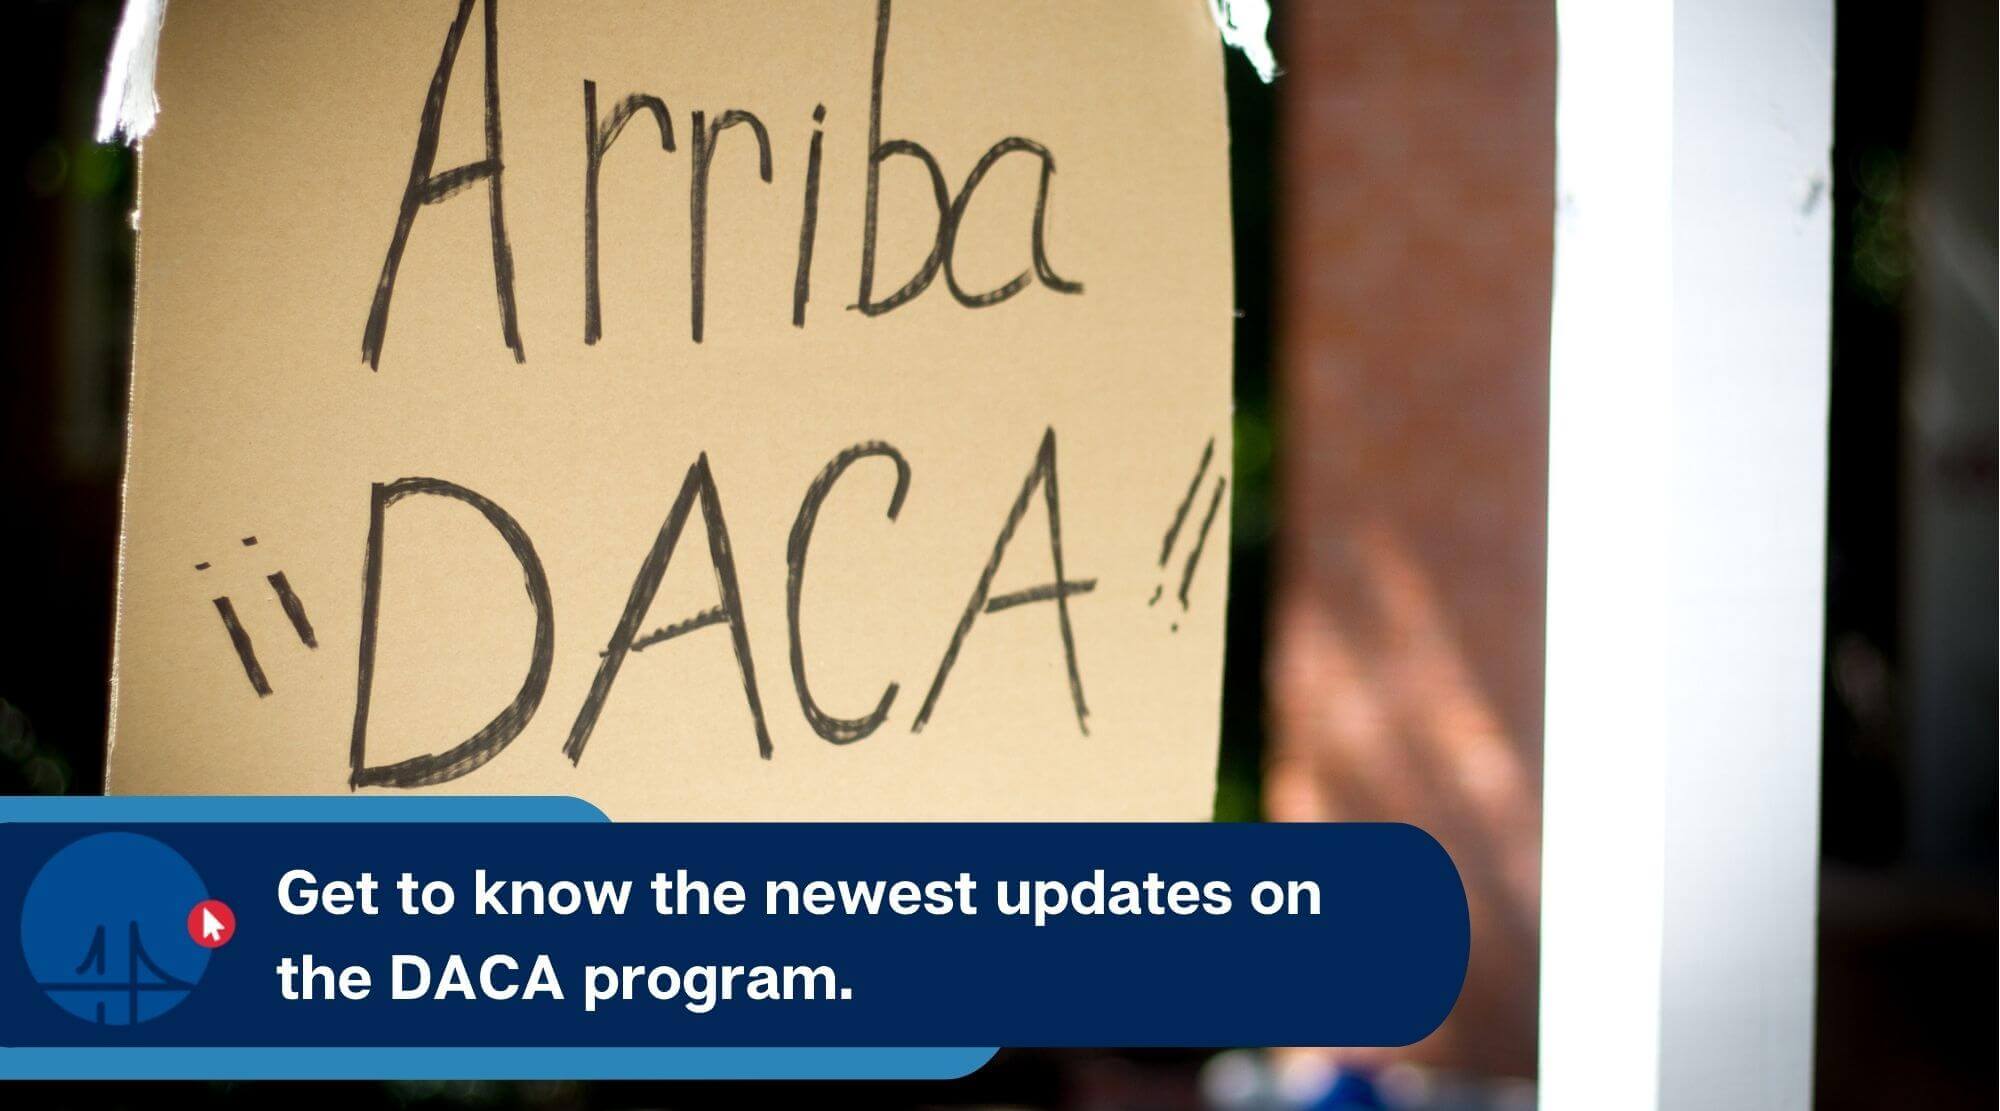 Get to know the newest updates on the DACA program